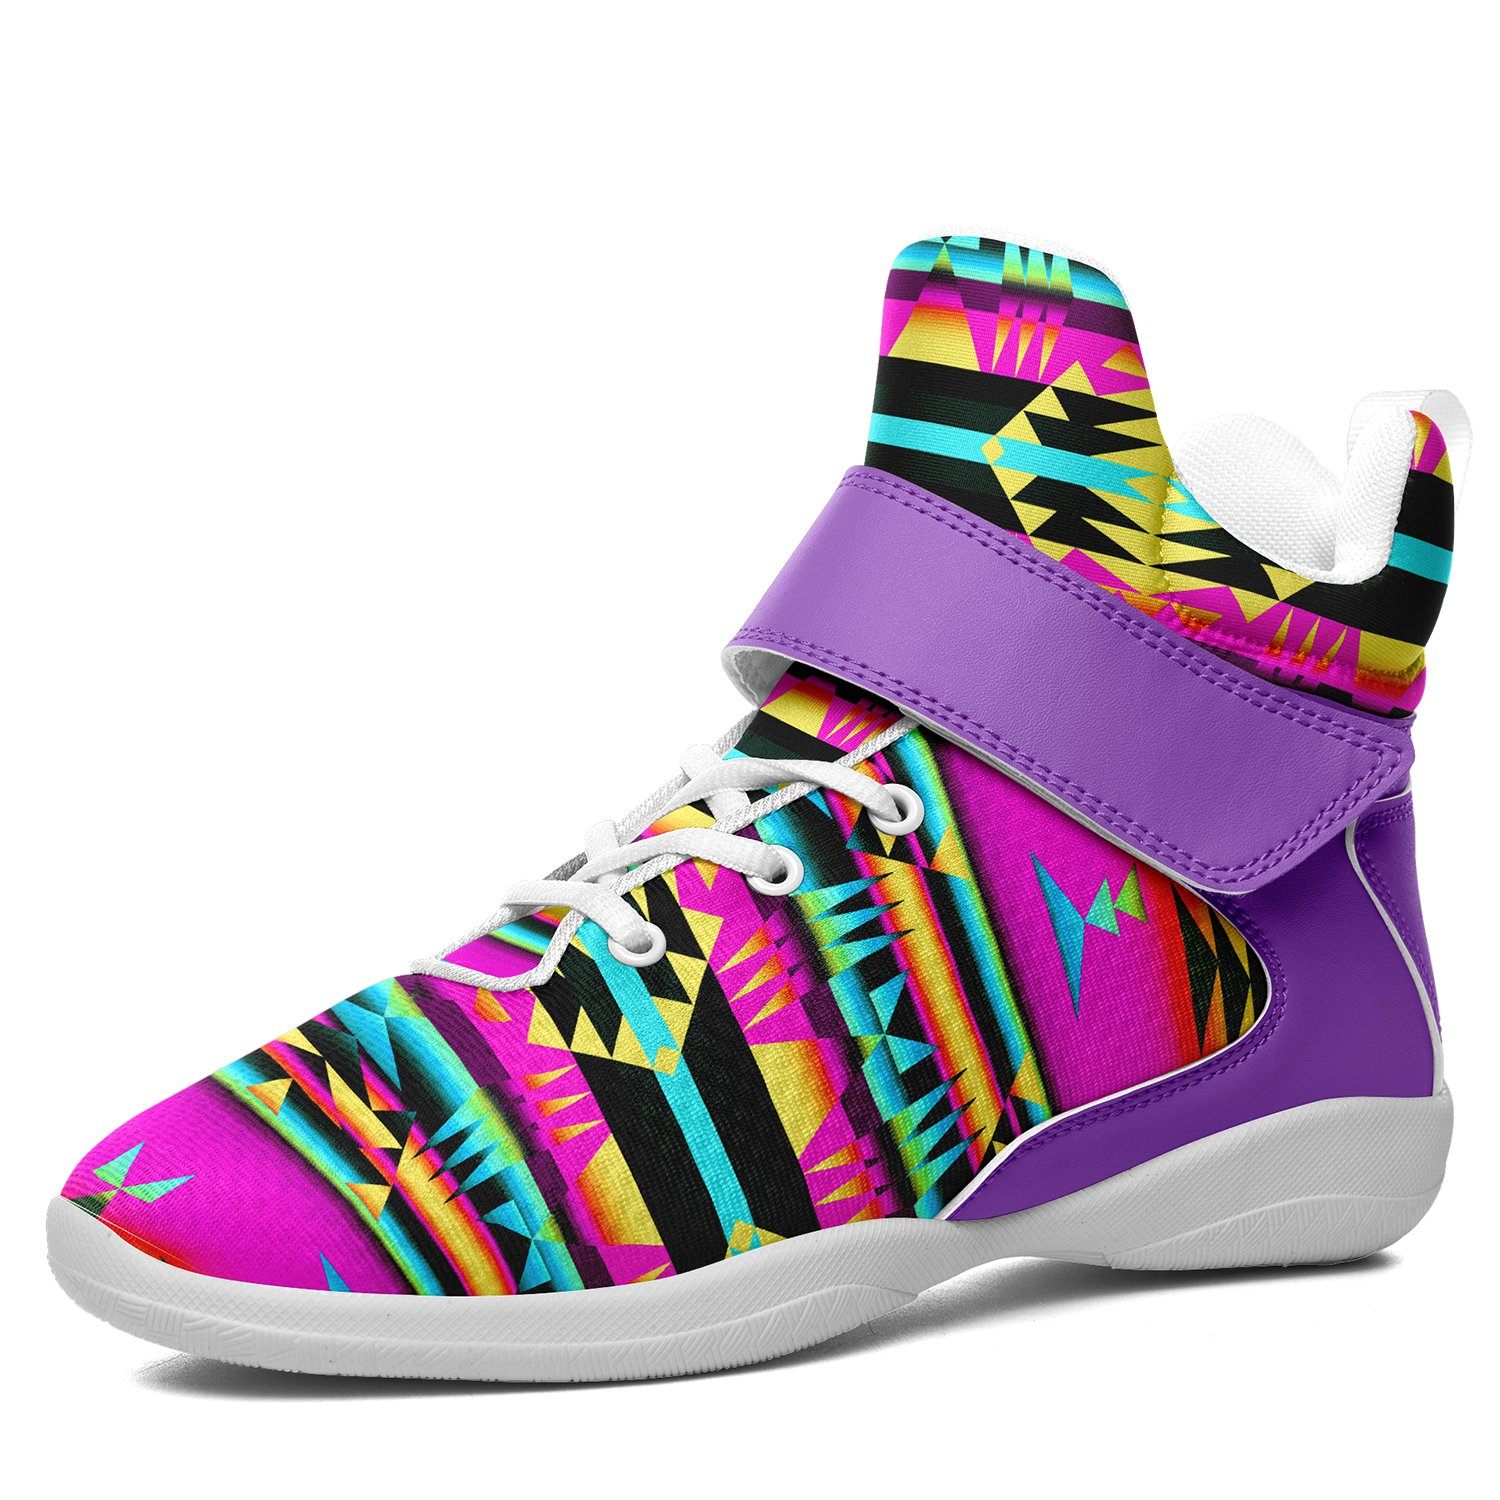 Between the Sunset Mountains Ipottaa Basketball / Sport High Top Shoes 49 Dzine US Child 12.5 / EUR 30 White Sole with Lavender Strap 